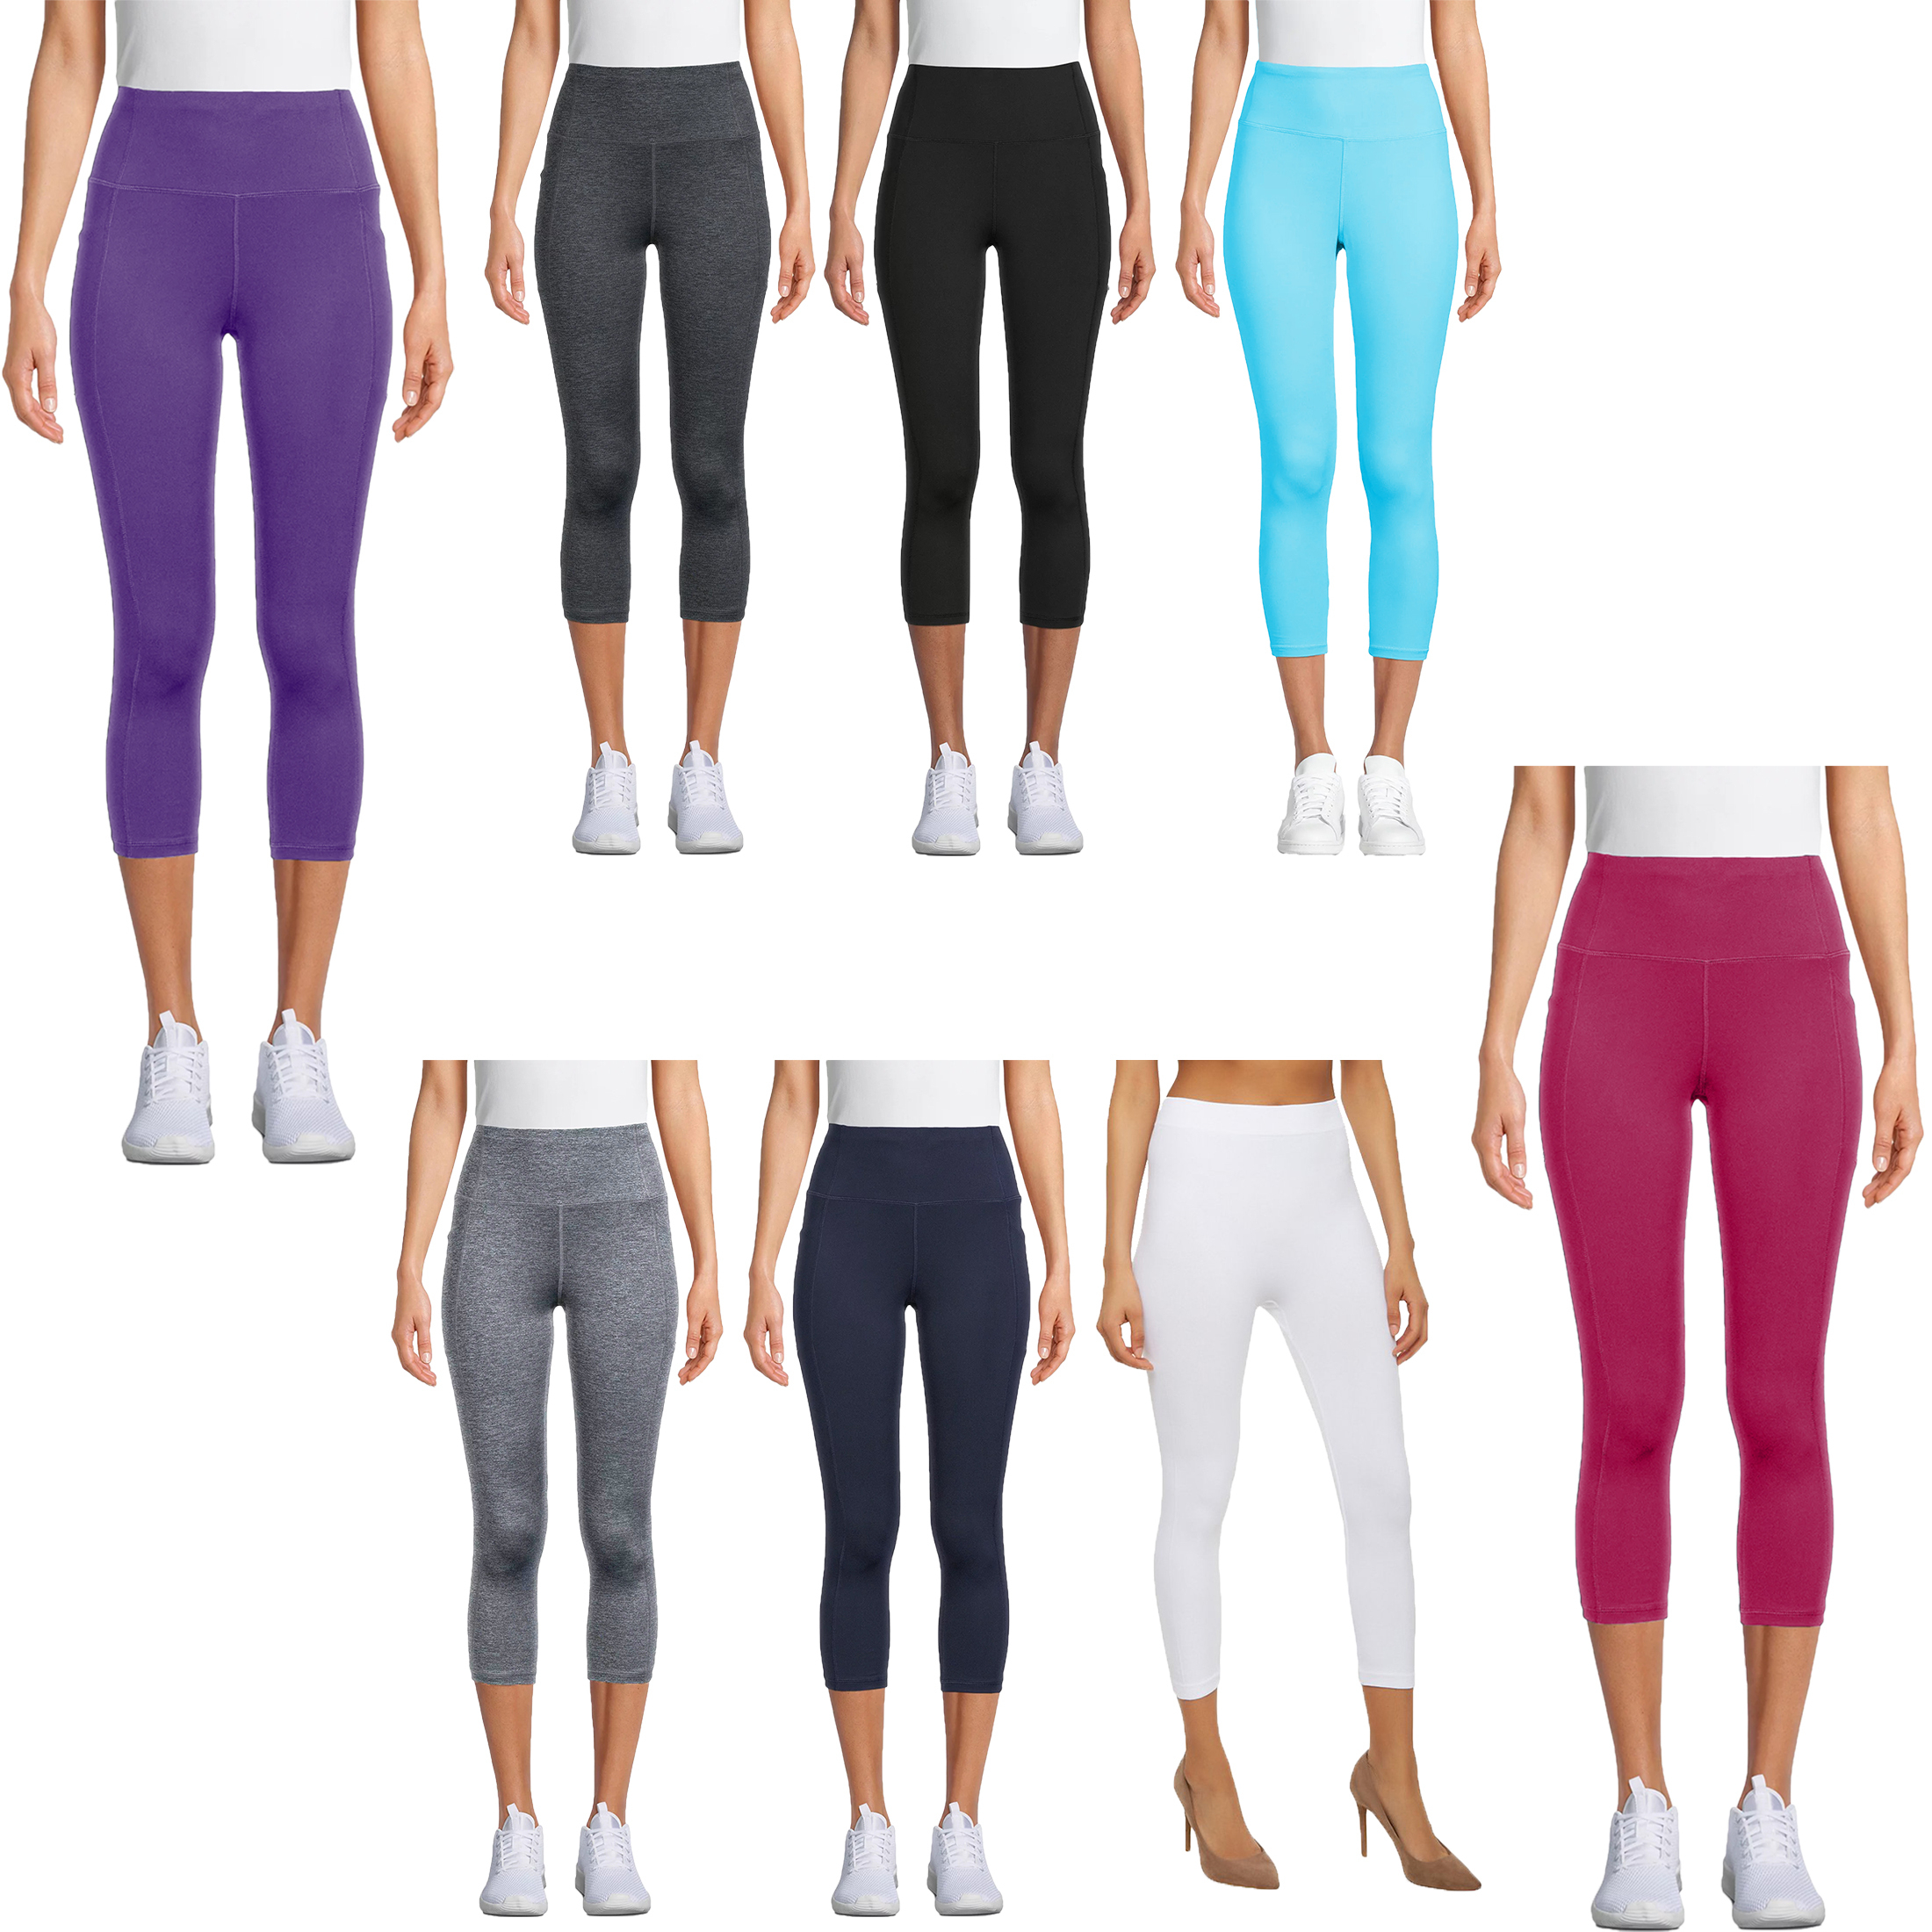 6-Pack: Ladies High Waisted Solid Basic Ultra Soft Active Workout Capri Leggings - S